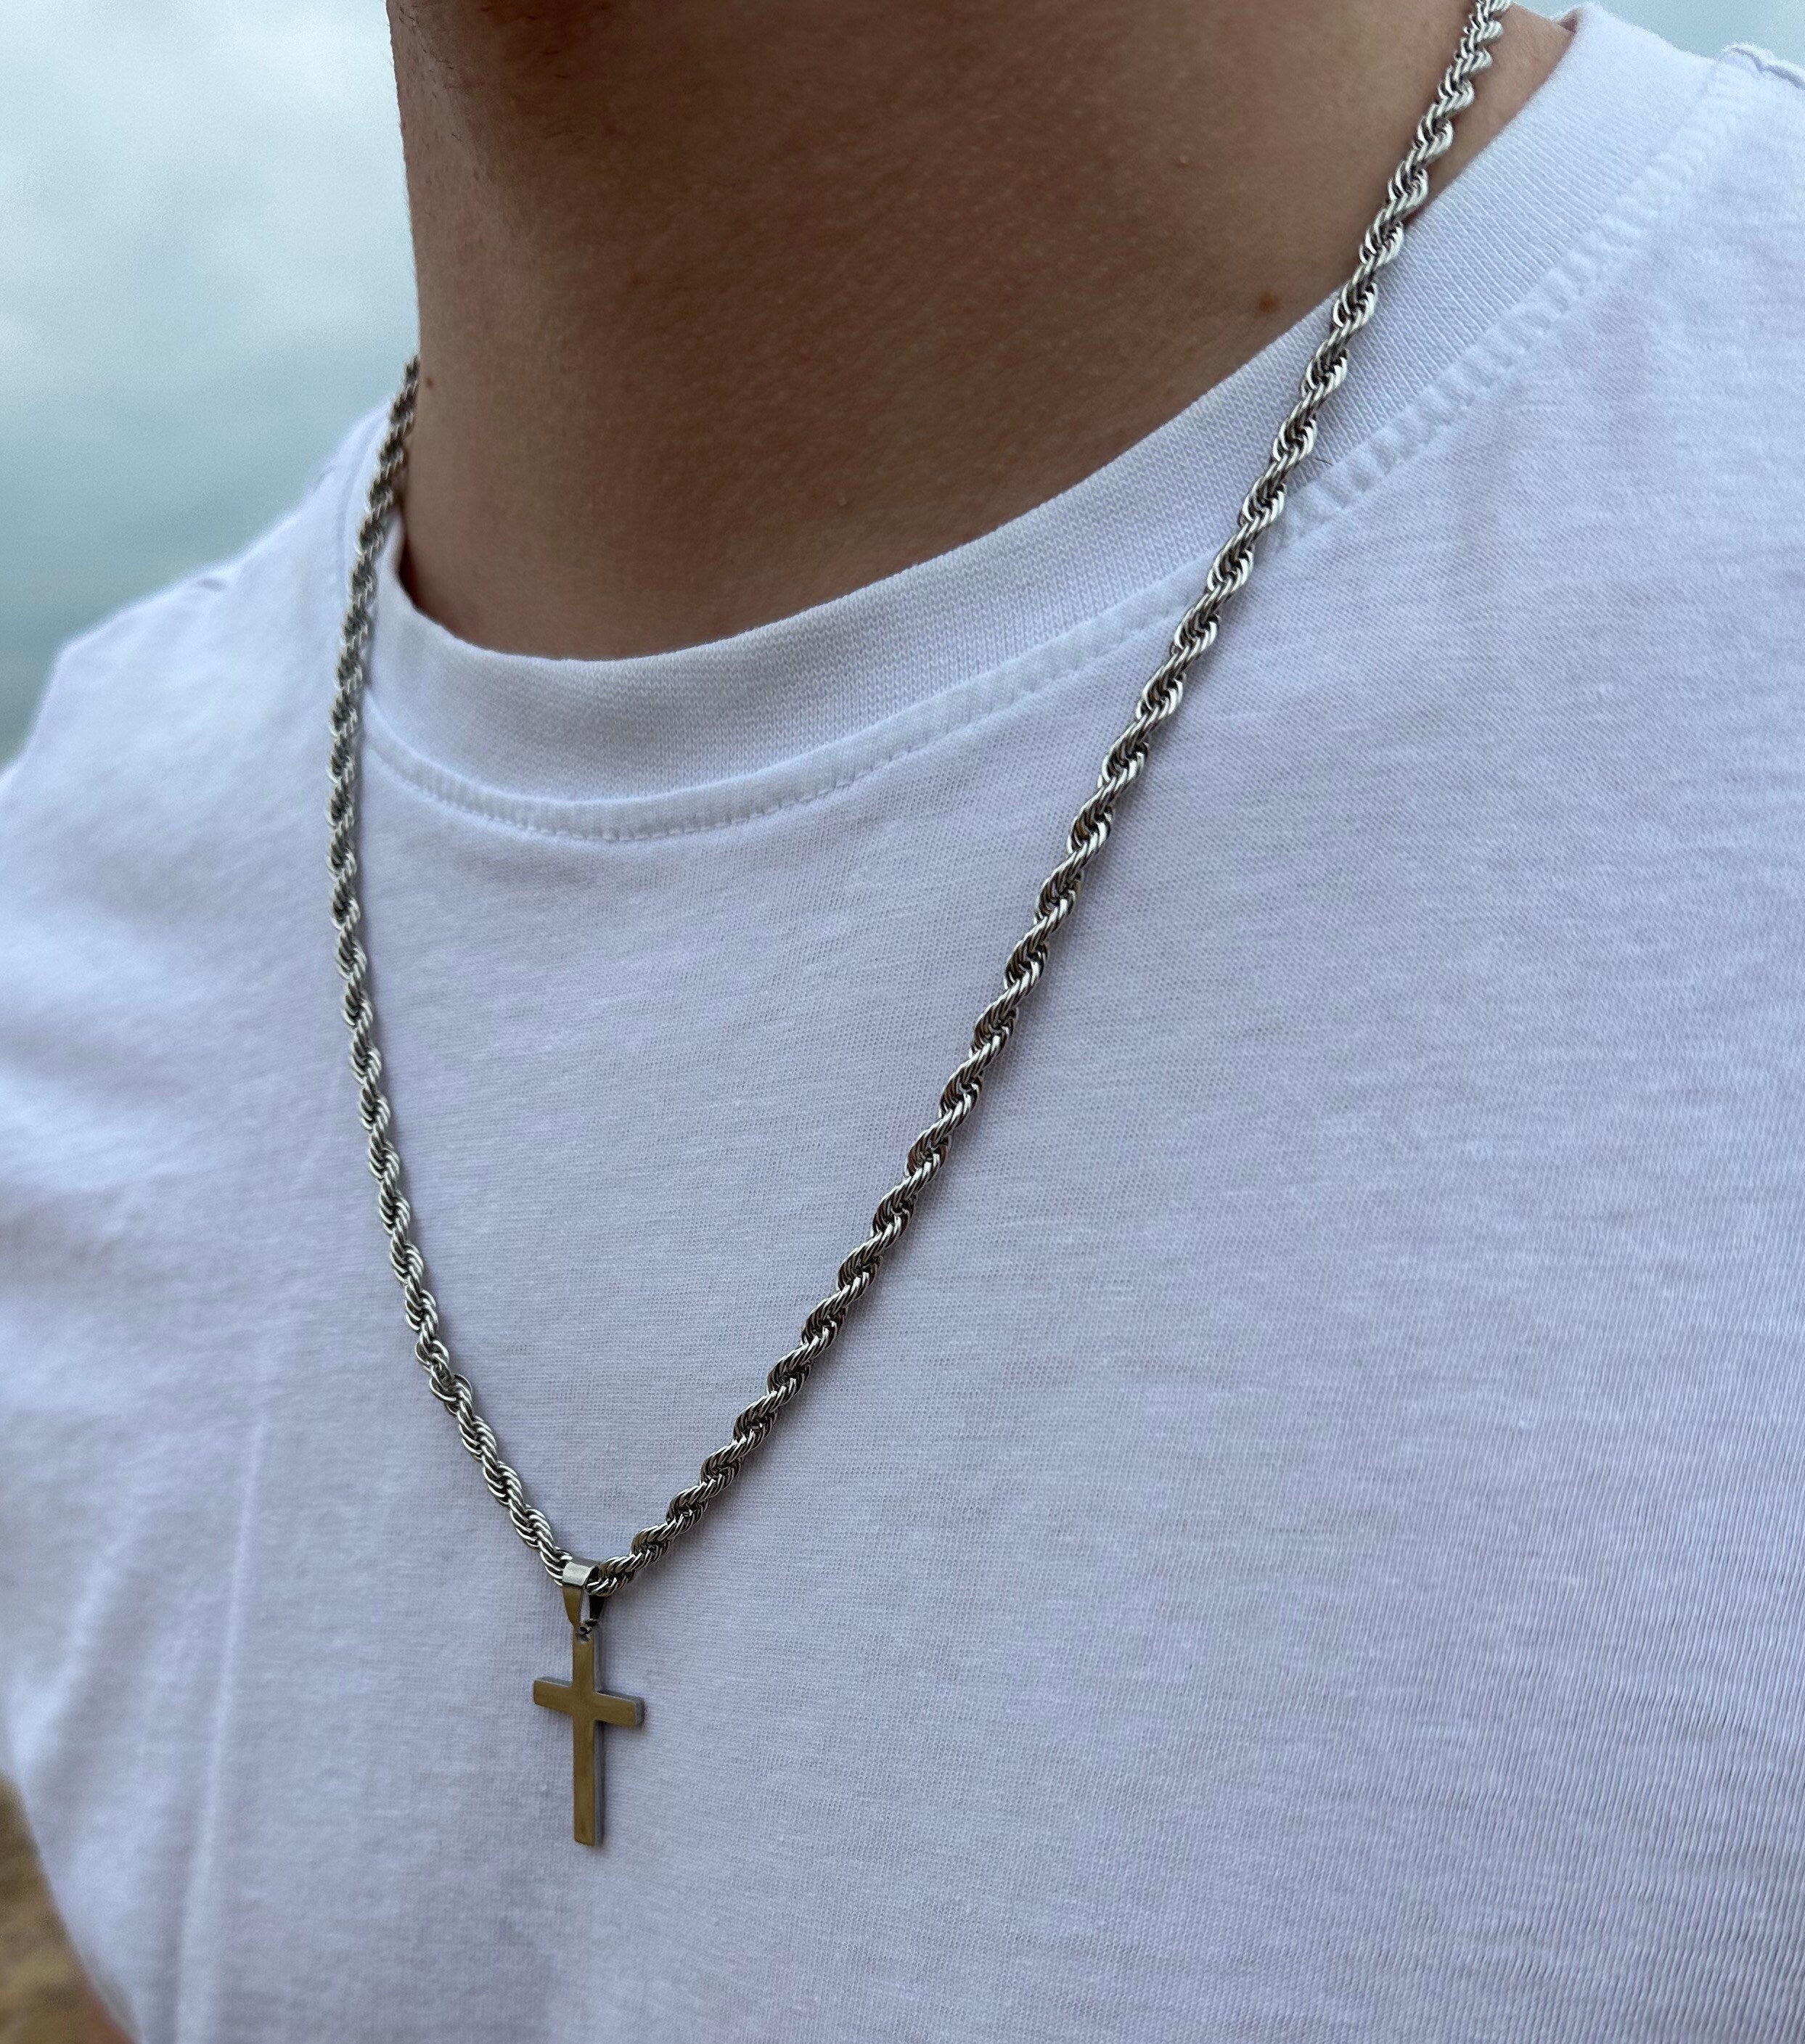 Christian Cross Necklaces For Men Silver, 24 inch - Eleganzia Jewelry